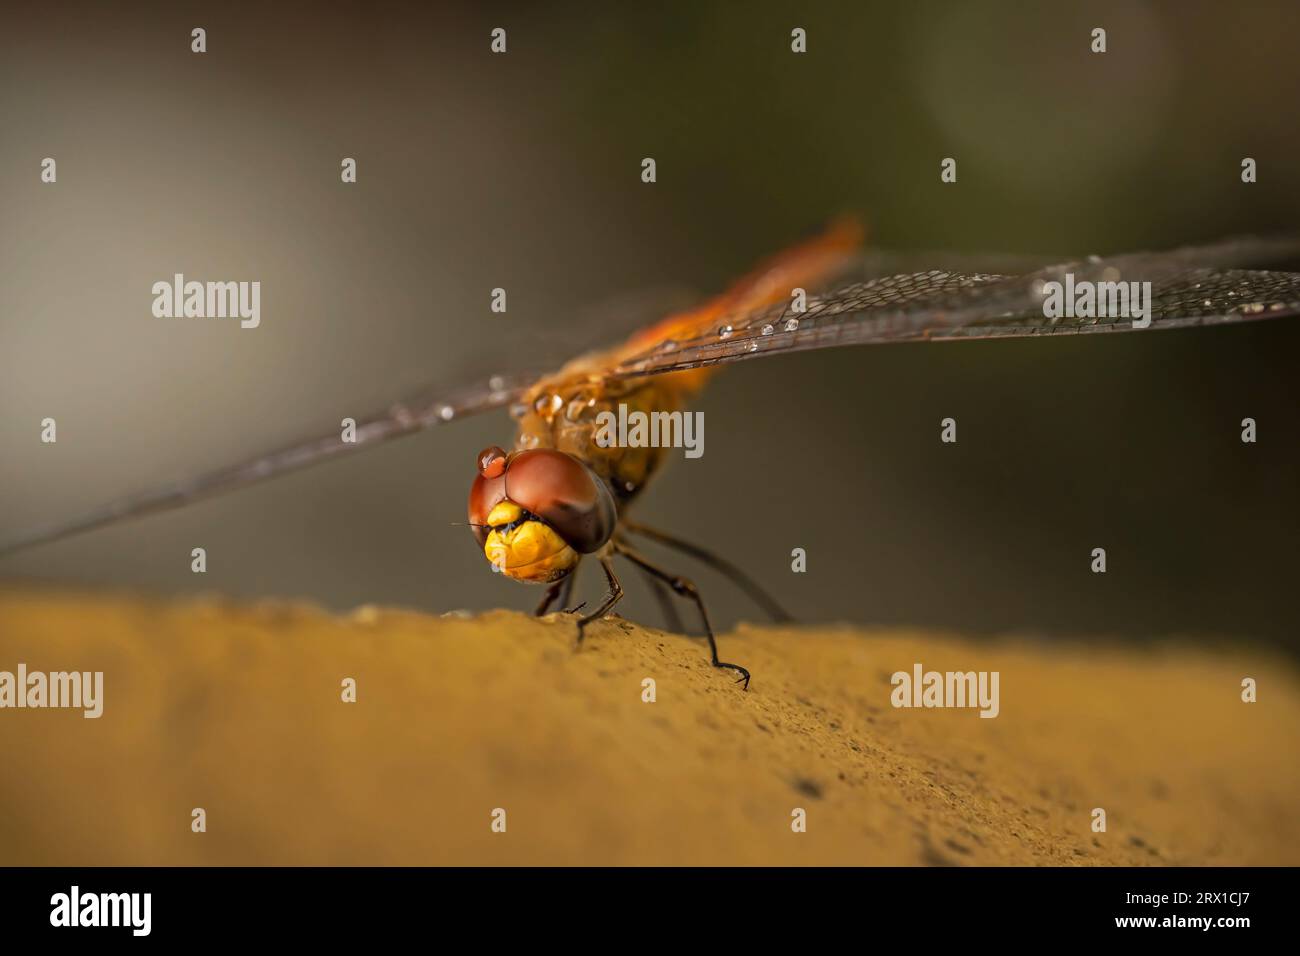 enlarged image of a dragonfly Stock Photo